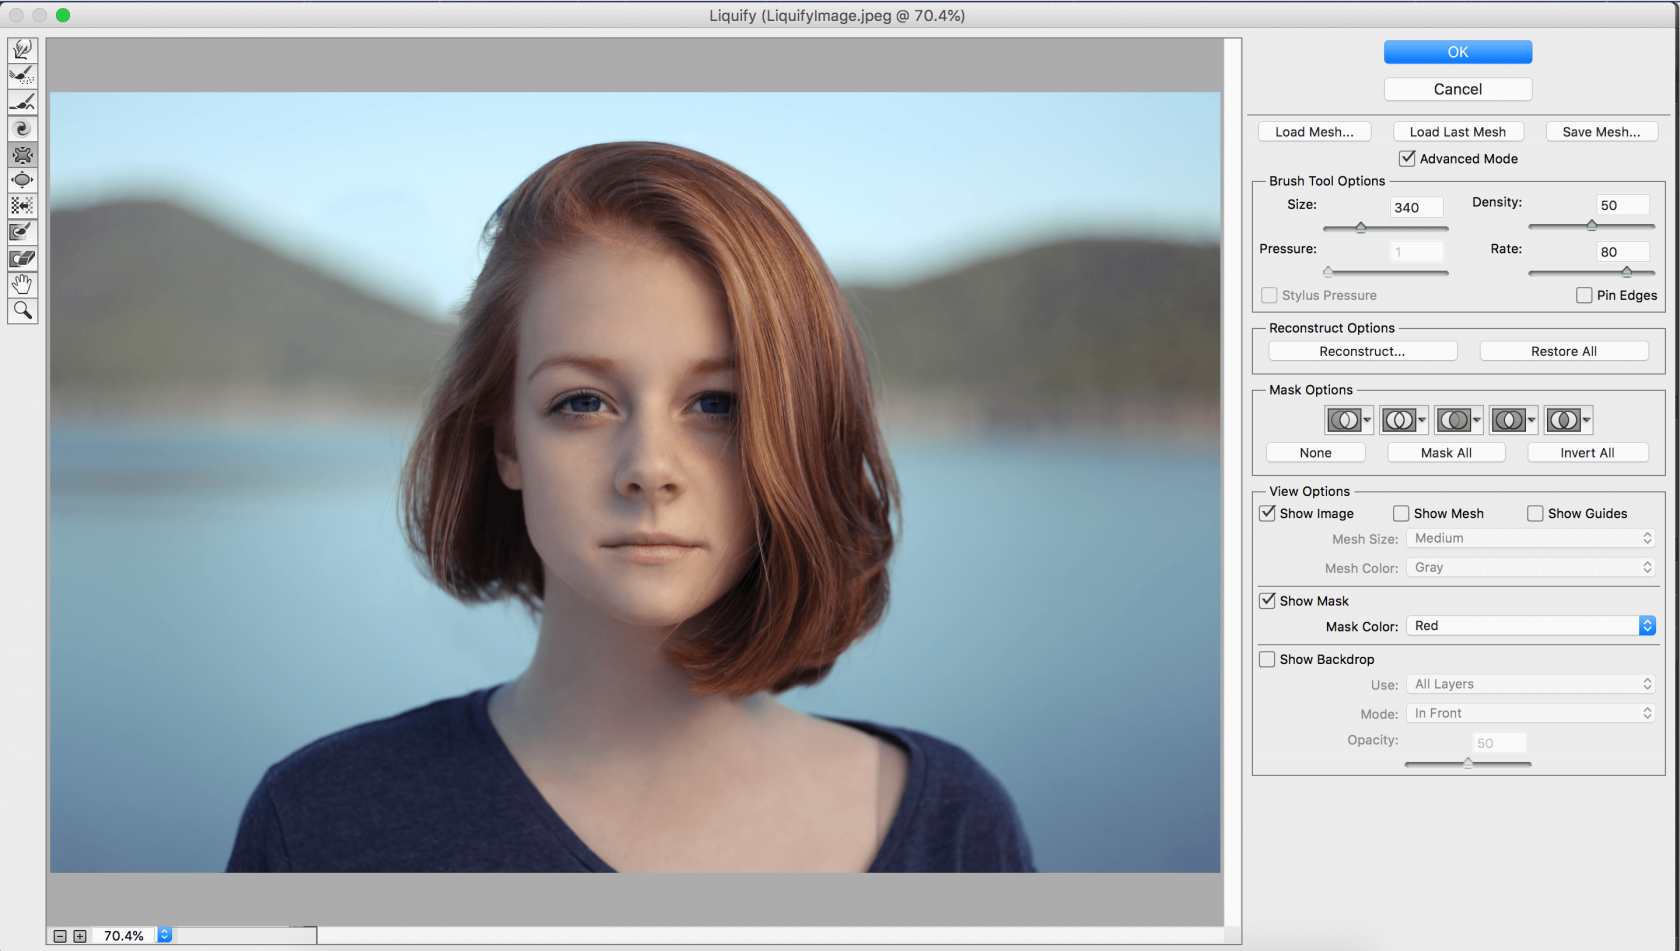 How to Use the Liquify Tool in Photoshop: Mastering the Basics Image9